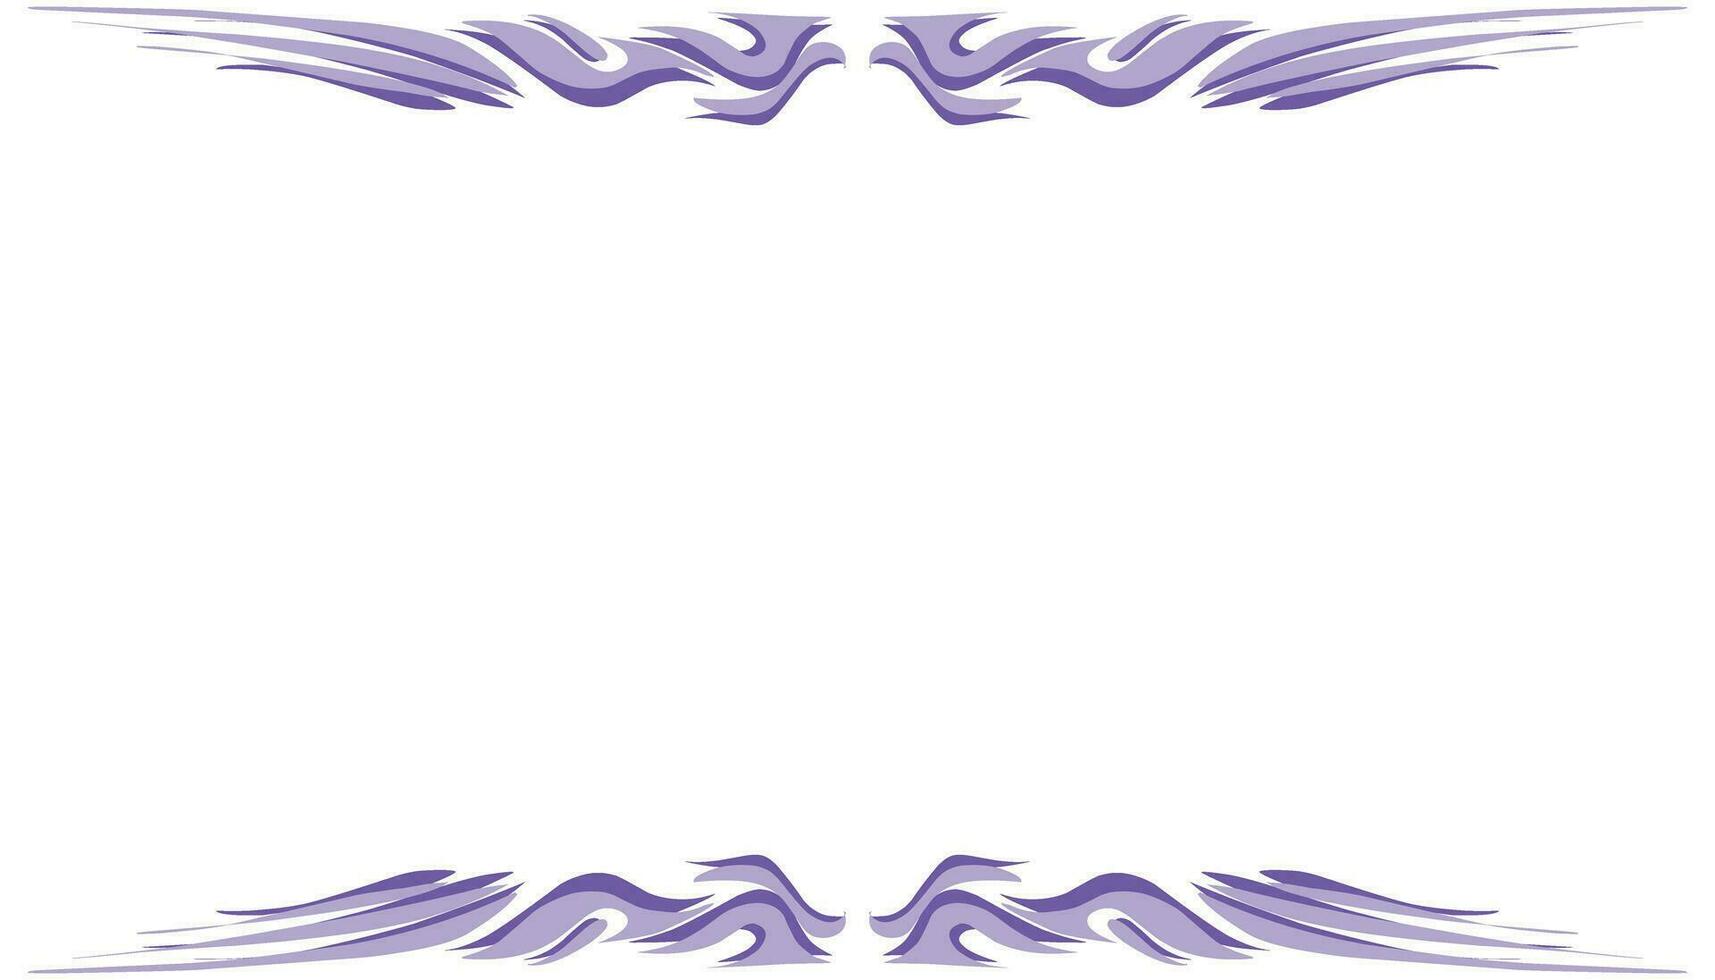 Abstract background with a purple theme frame. Perfect for wallpaper, invitation cards, envelopes, magazines, book covers. vector